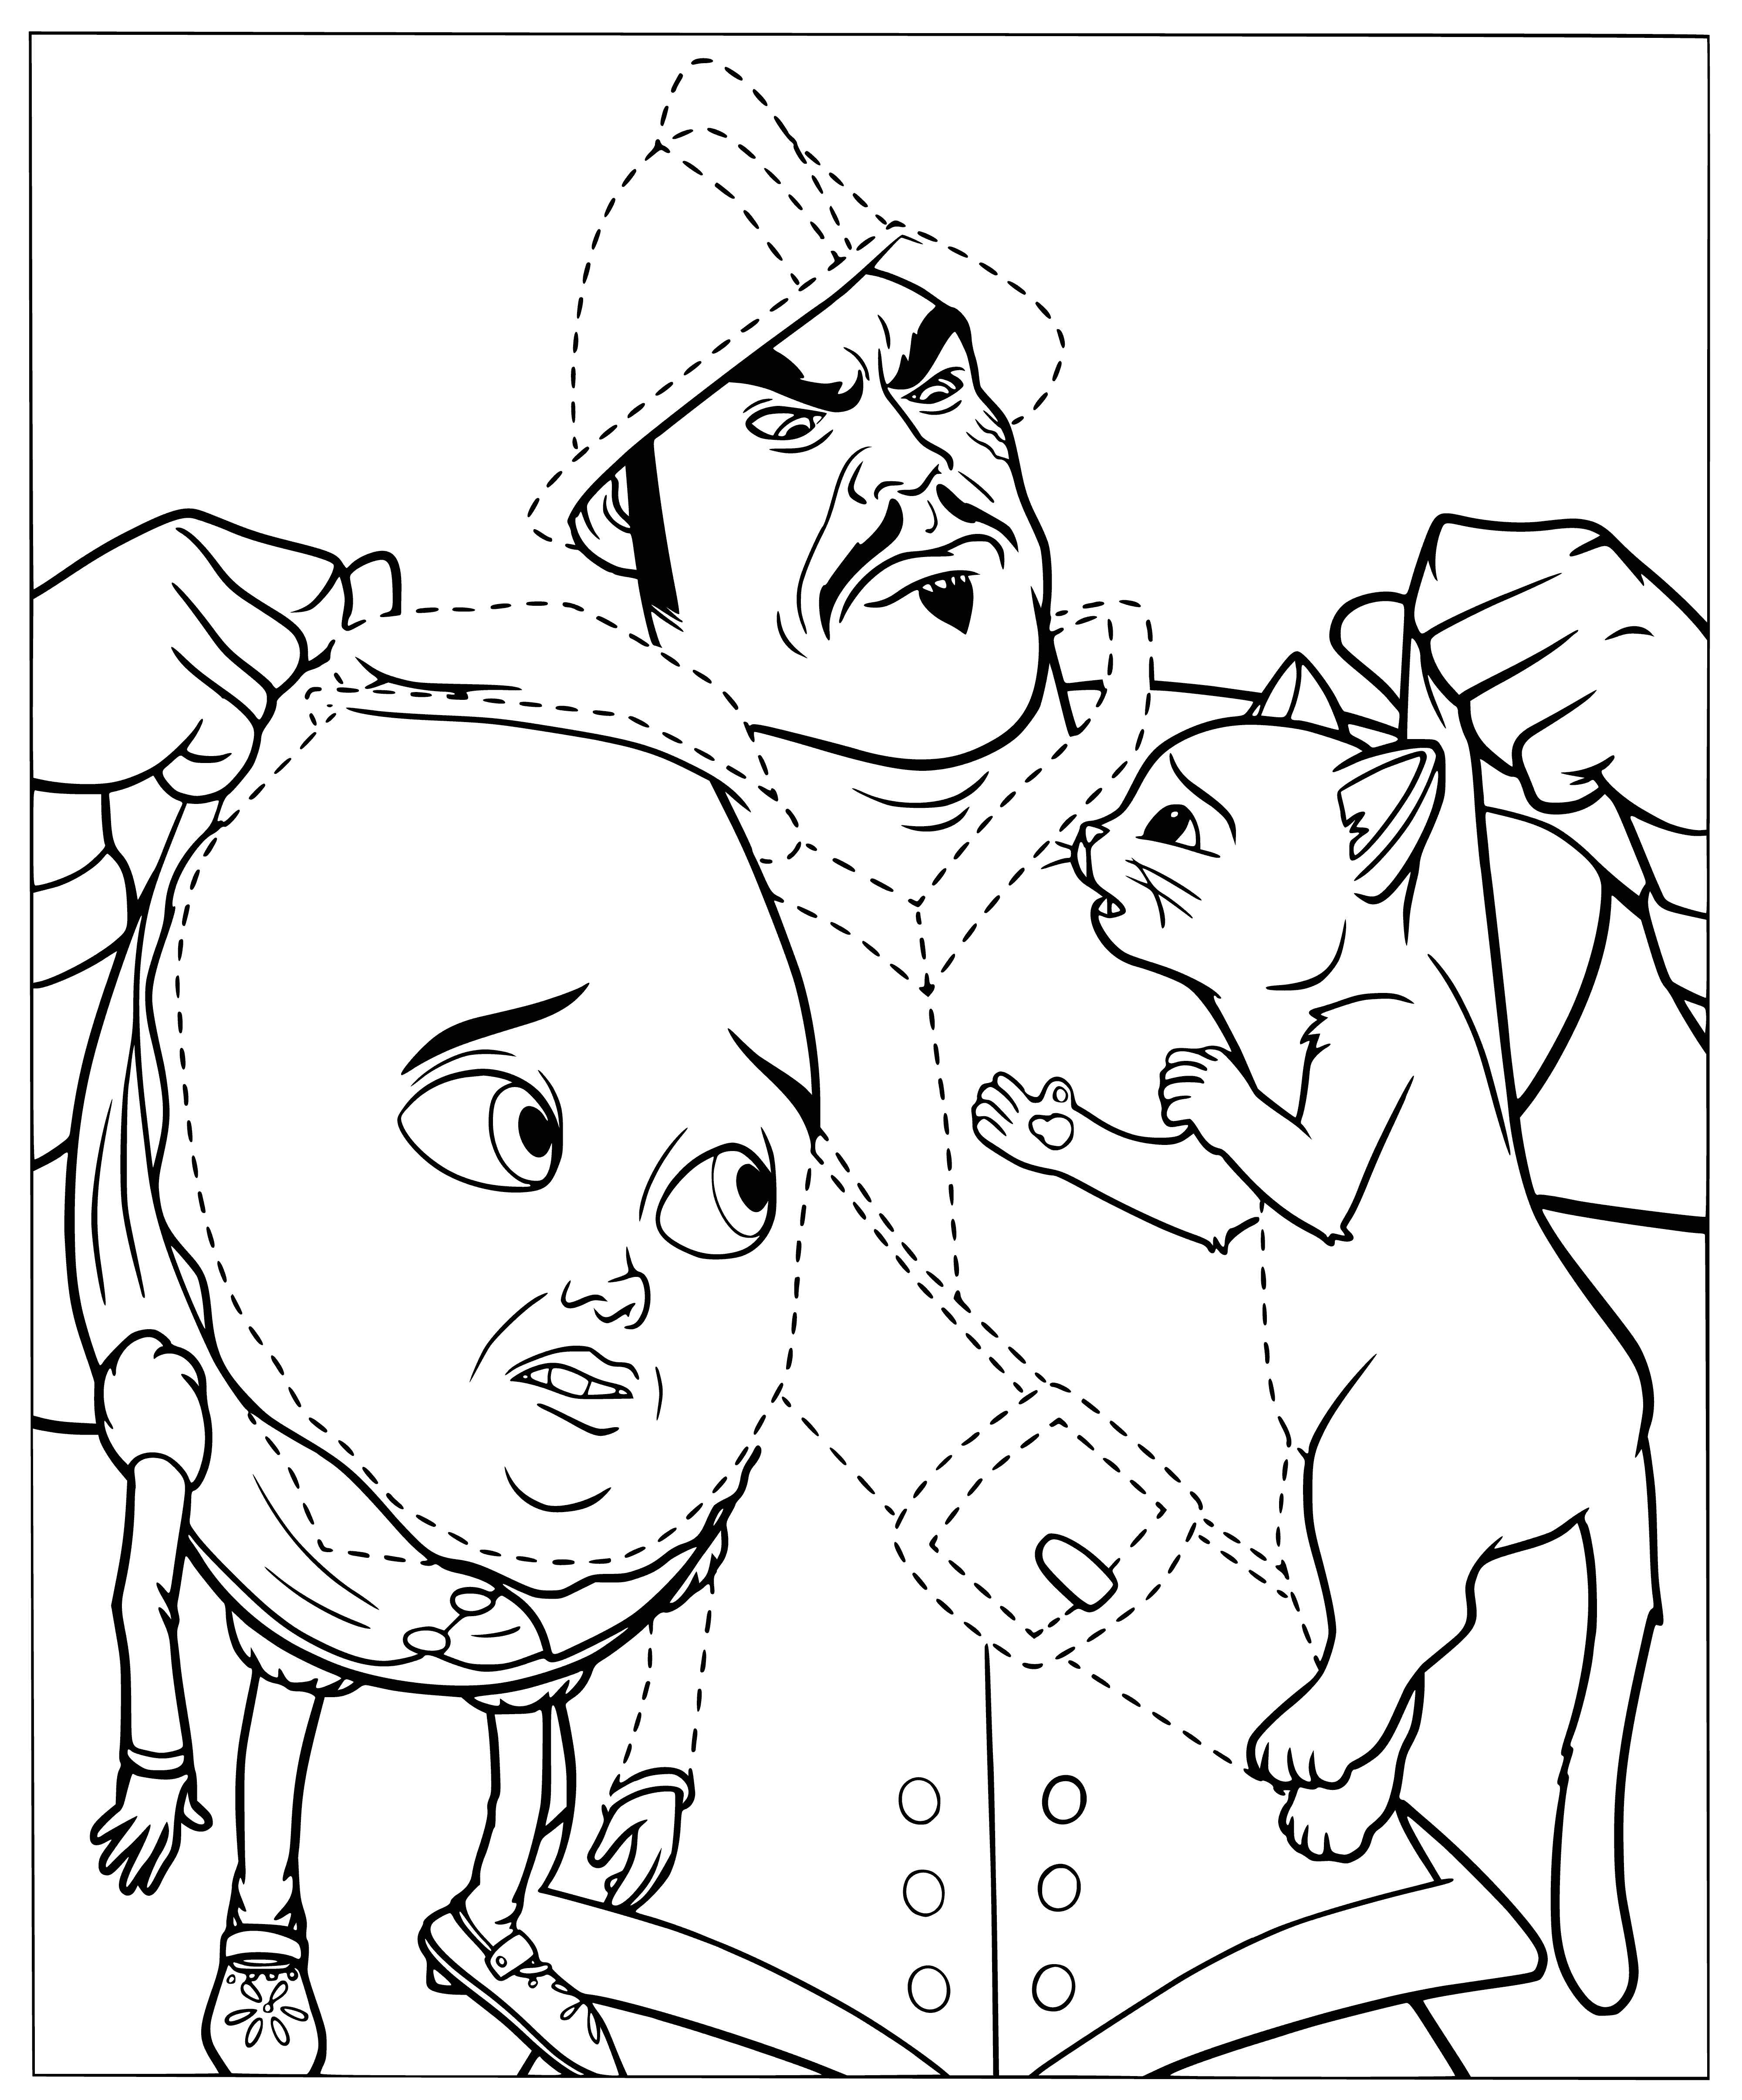 coloring page: Man in uniform holds a rope on a smiling cat with a sword strapped to its back.